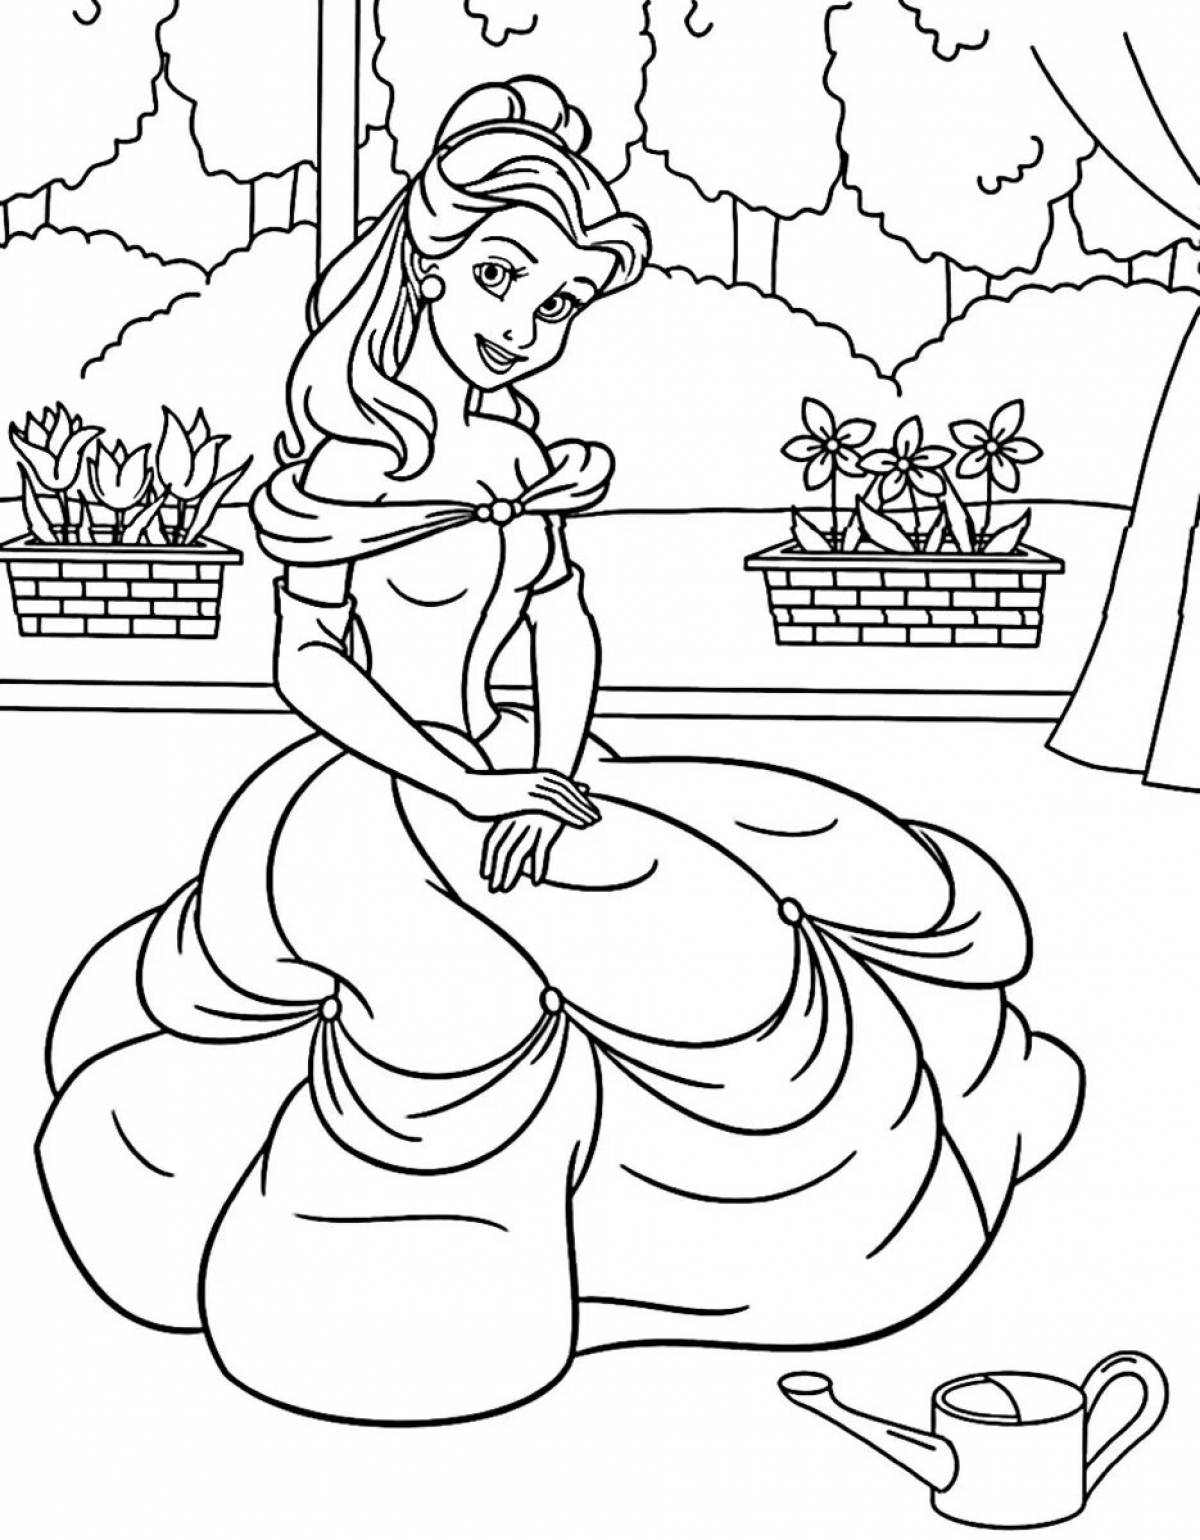 Colourful princess coloring book for kids